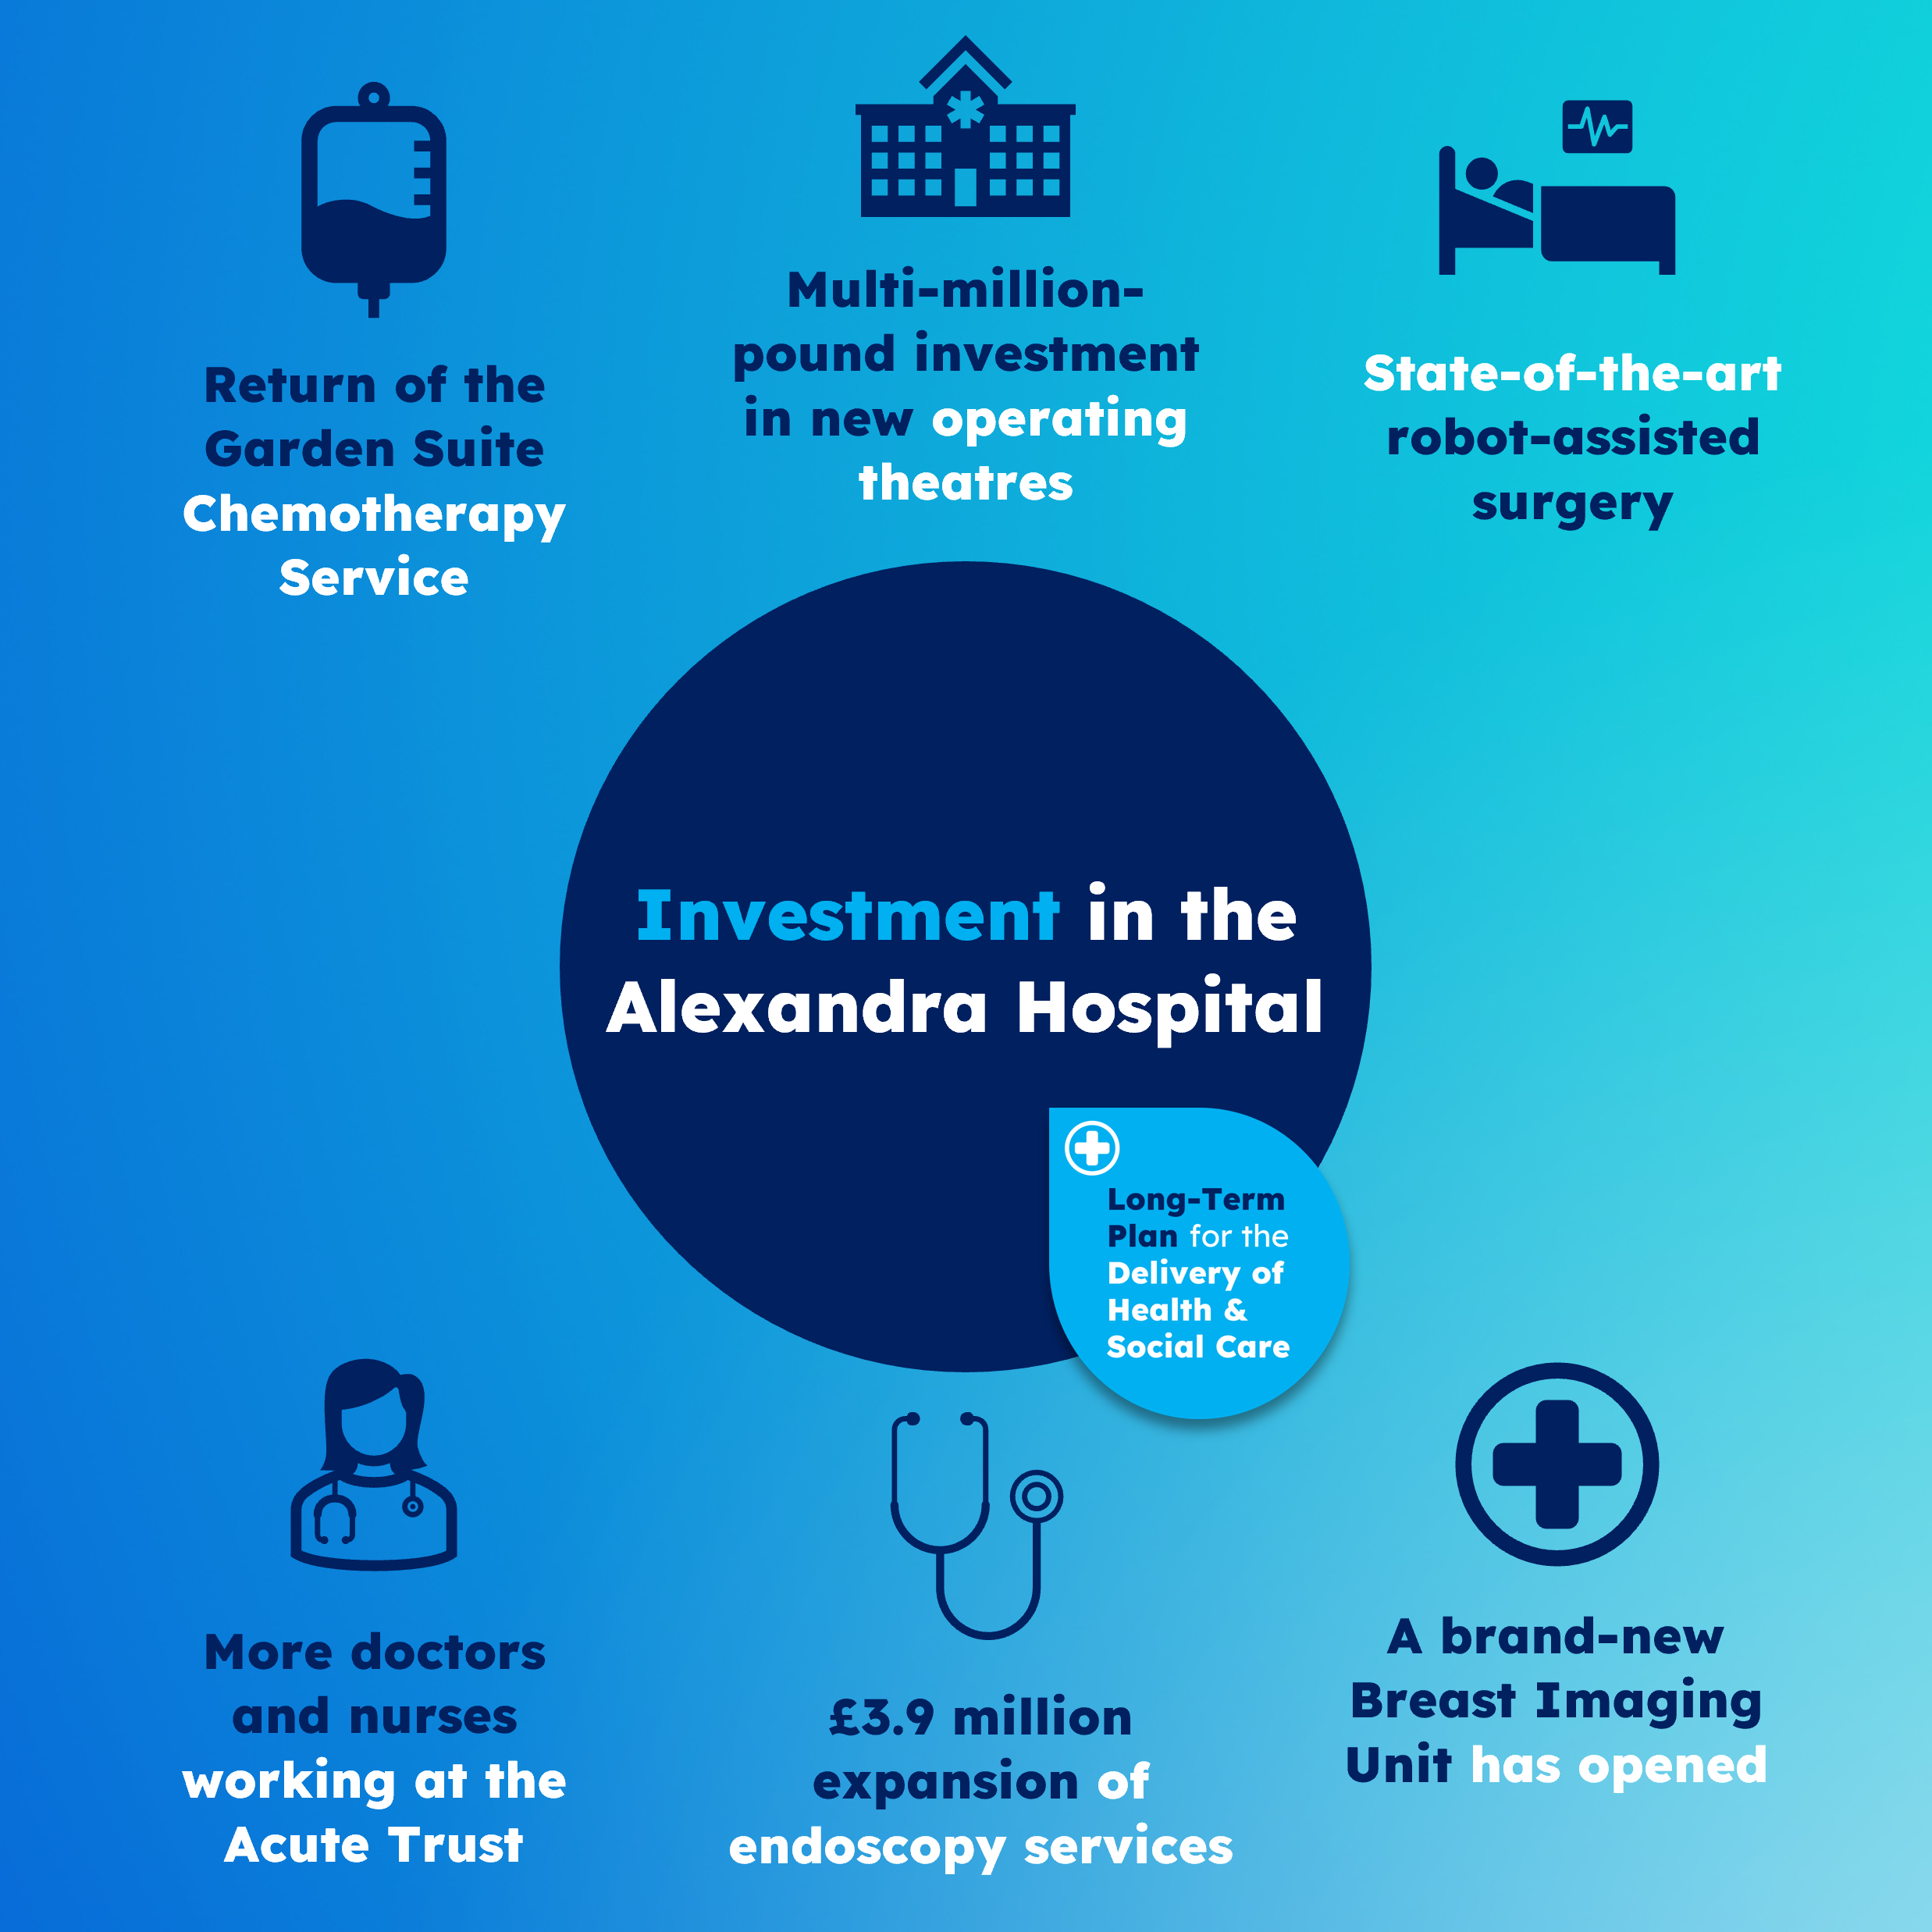 Investment in the Alexandra Hospital